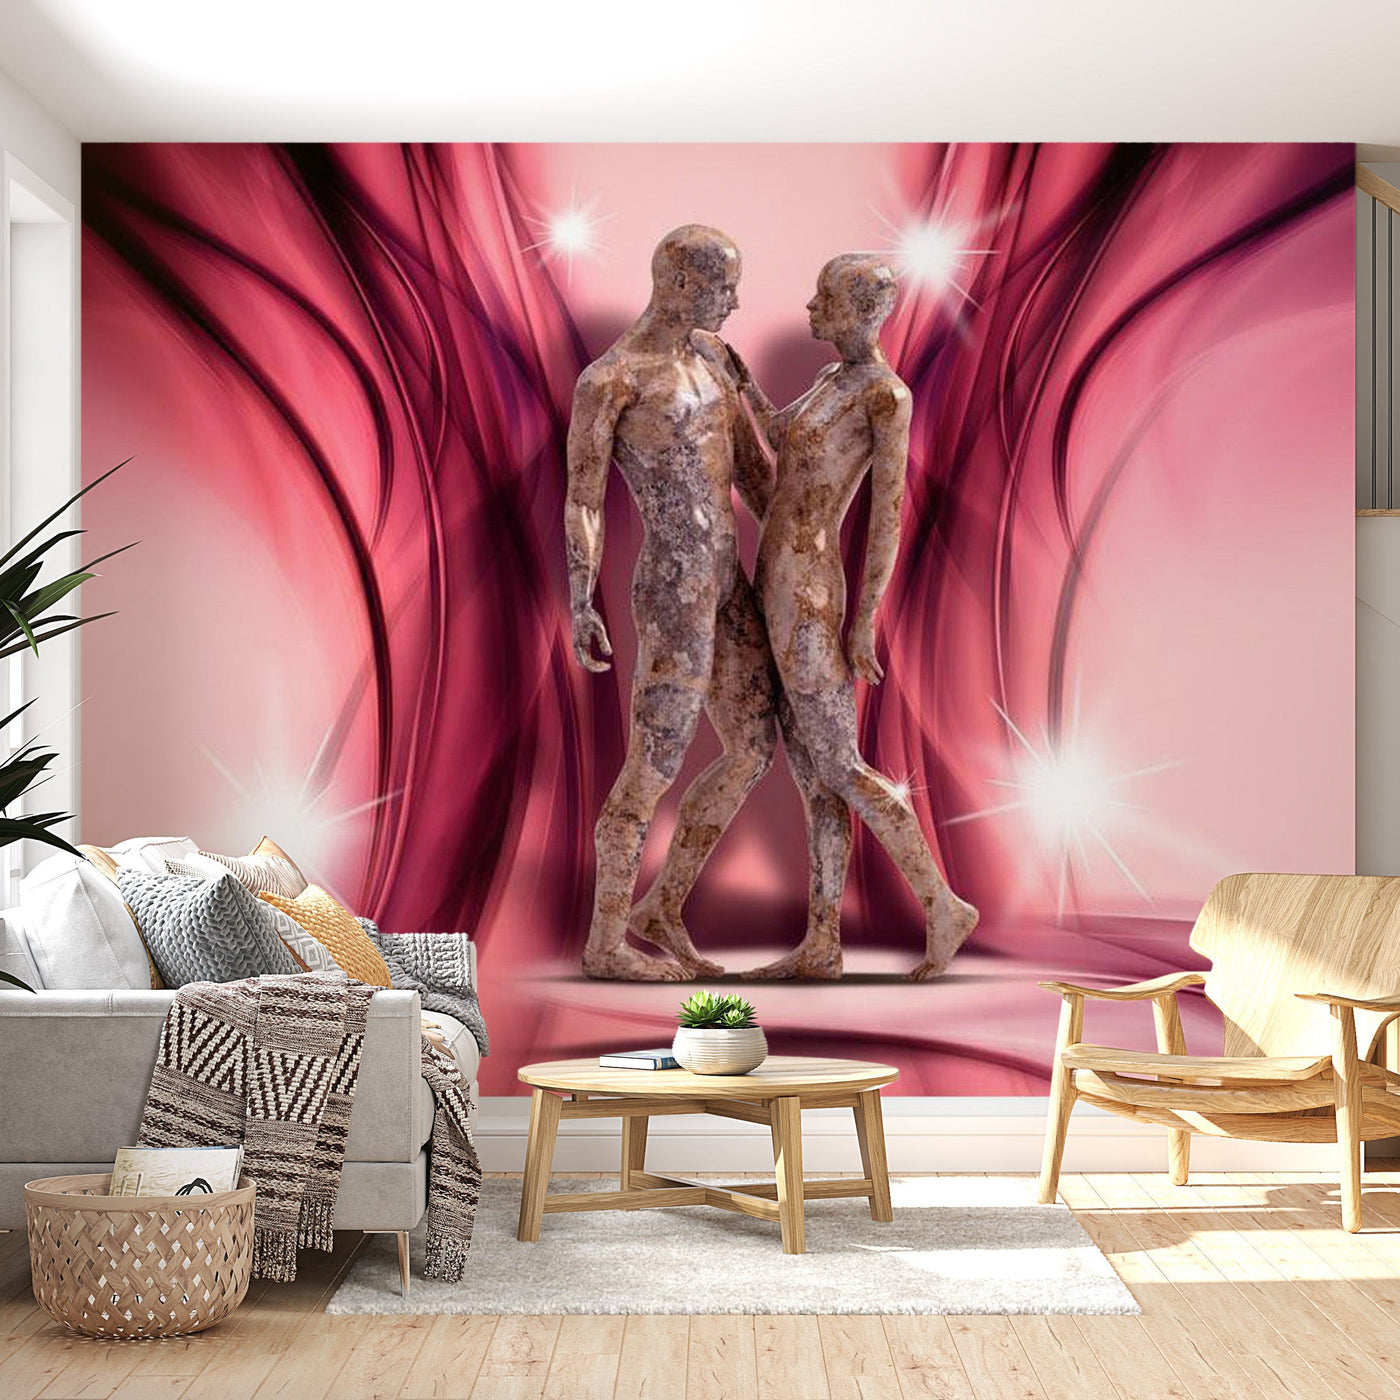 Peel & Stick Glam Wall Mural - Marble Dance - Removable Wall Decals